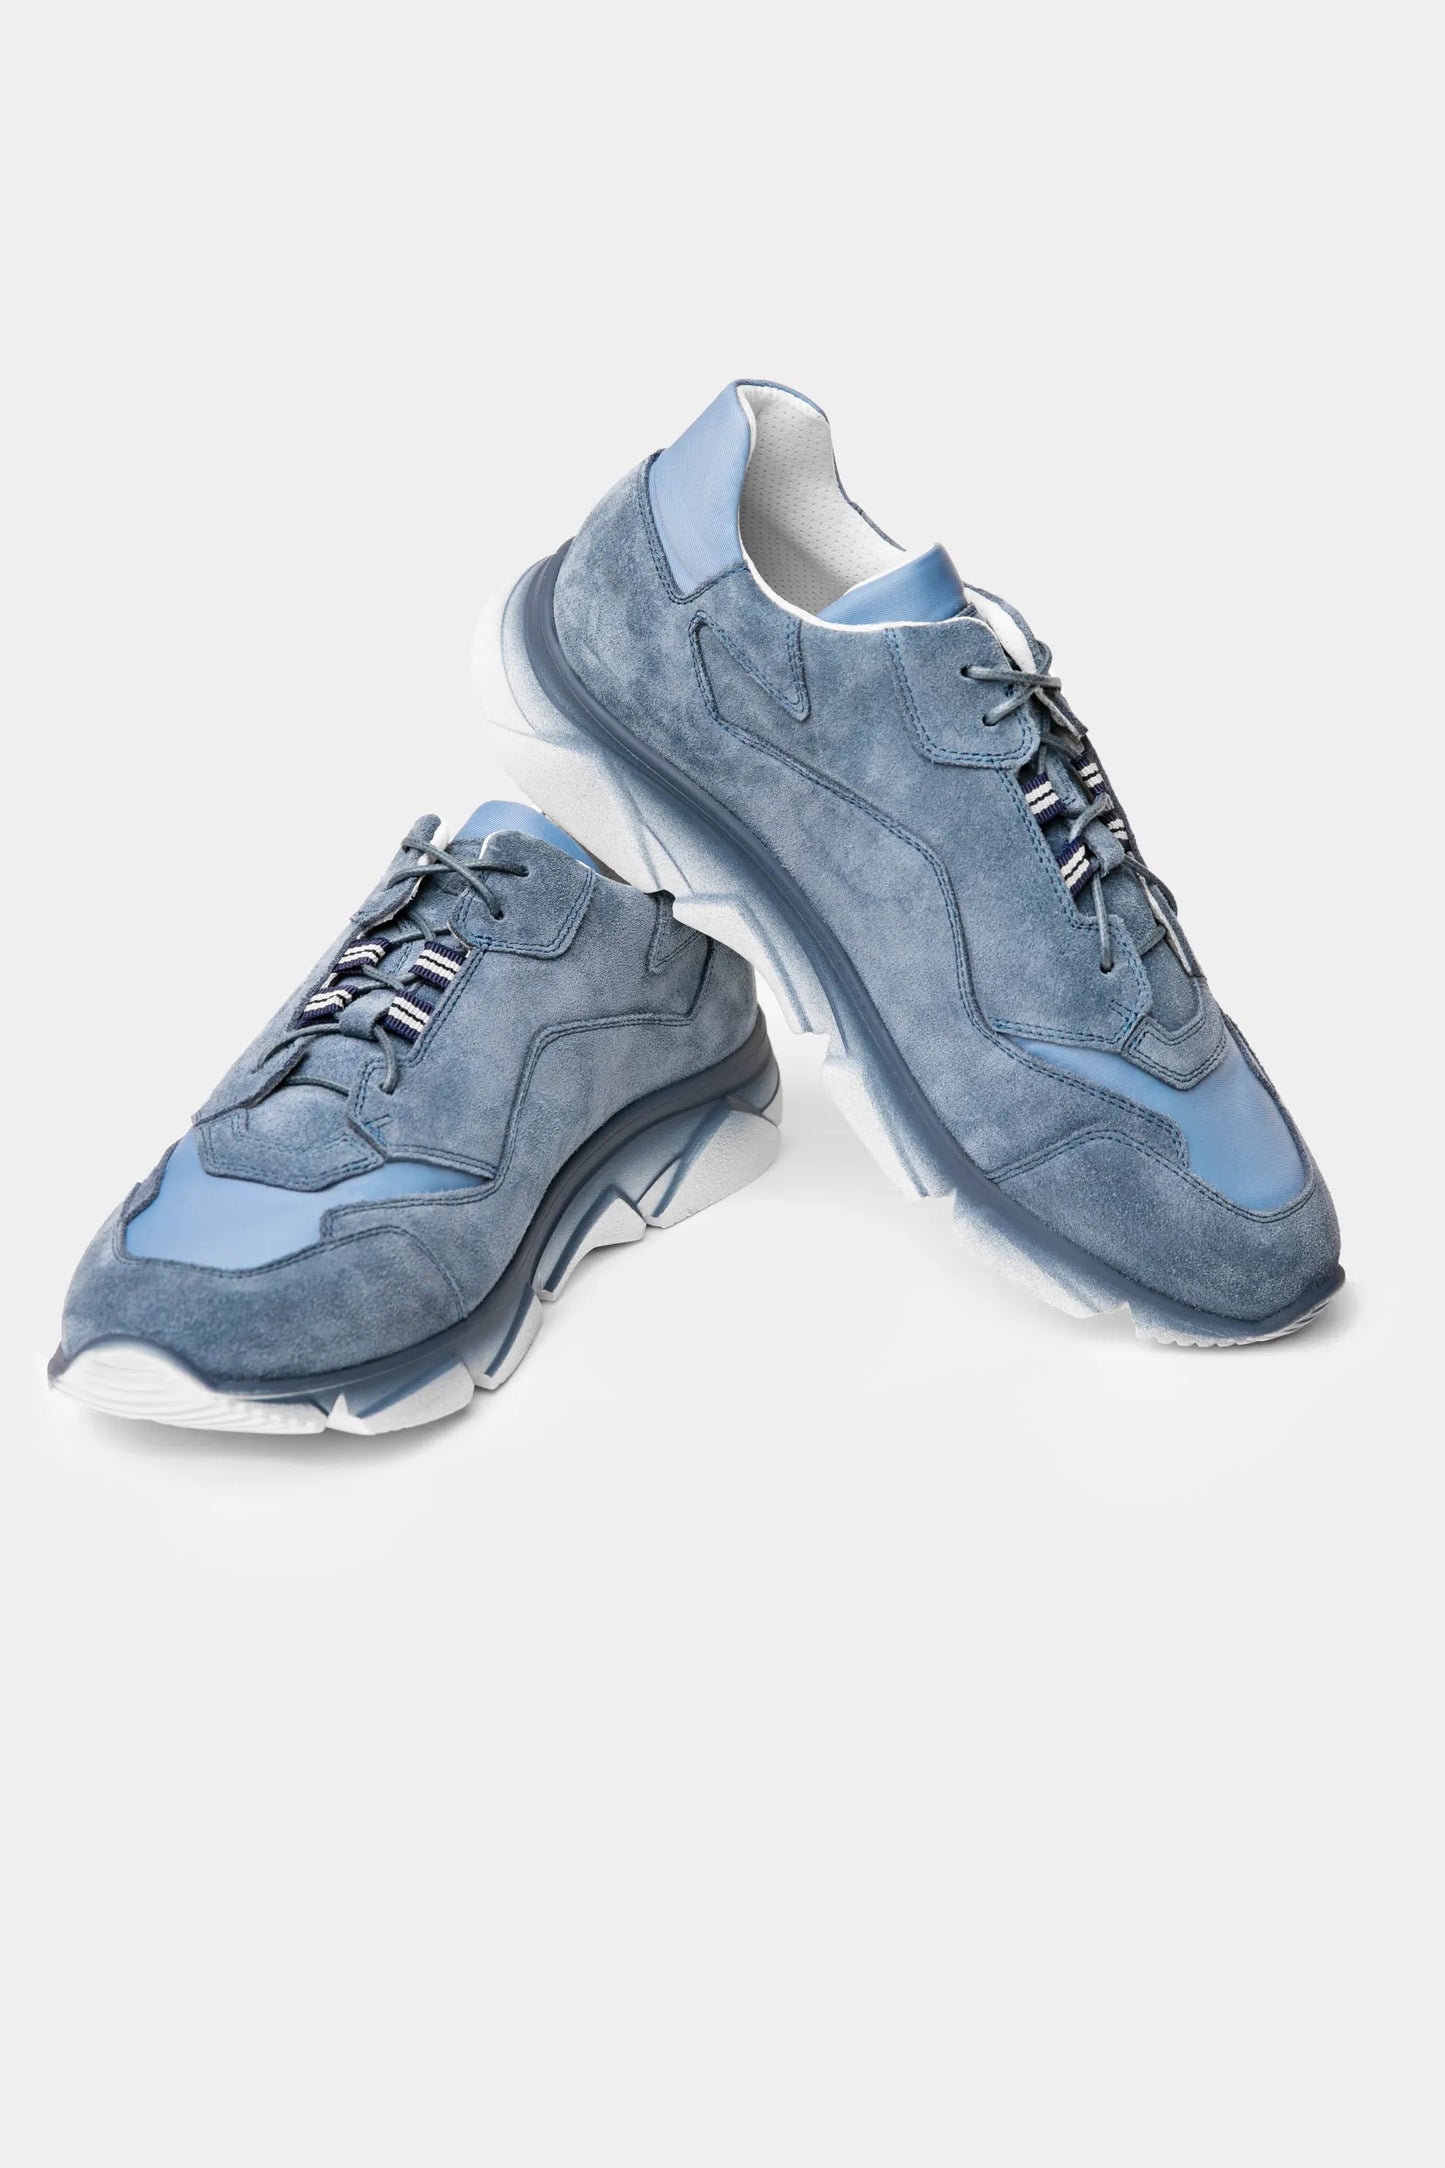 Light Blue Suede Athletic Sneakers